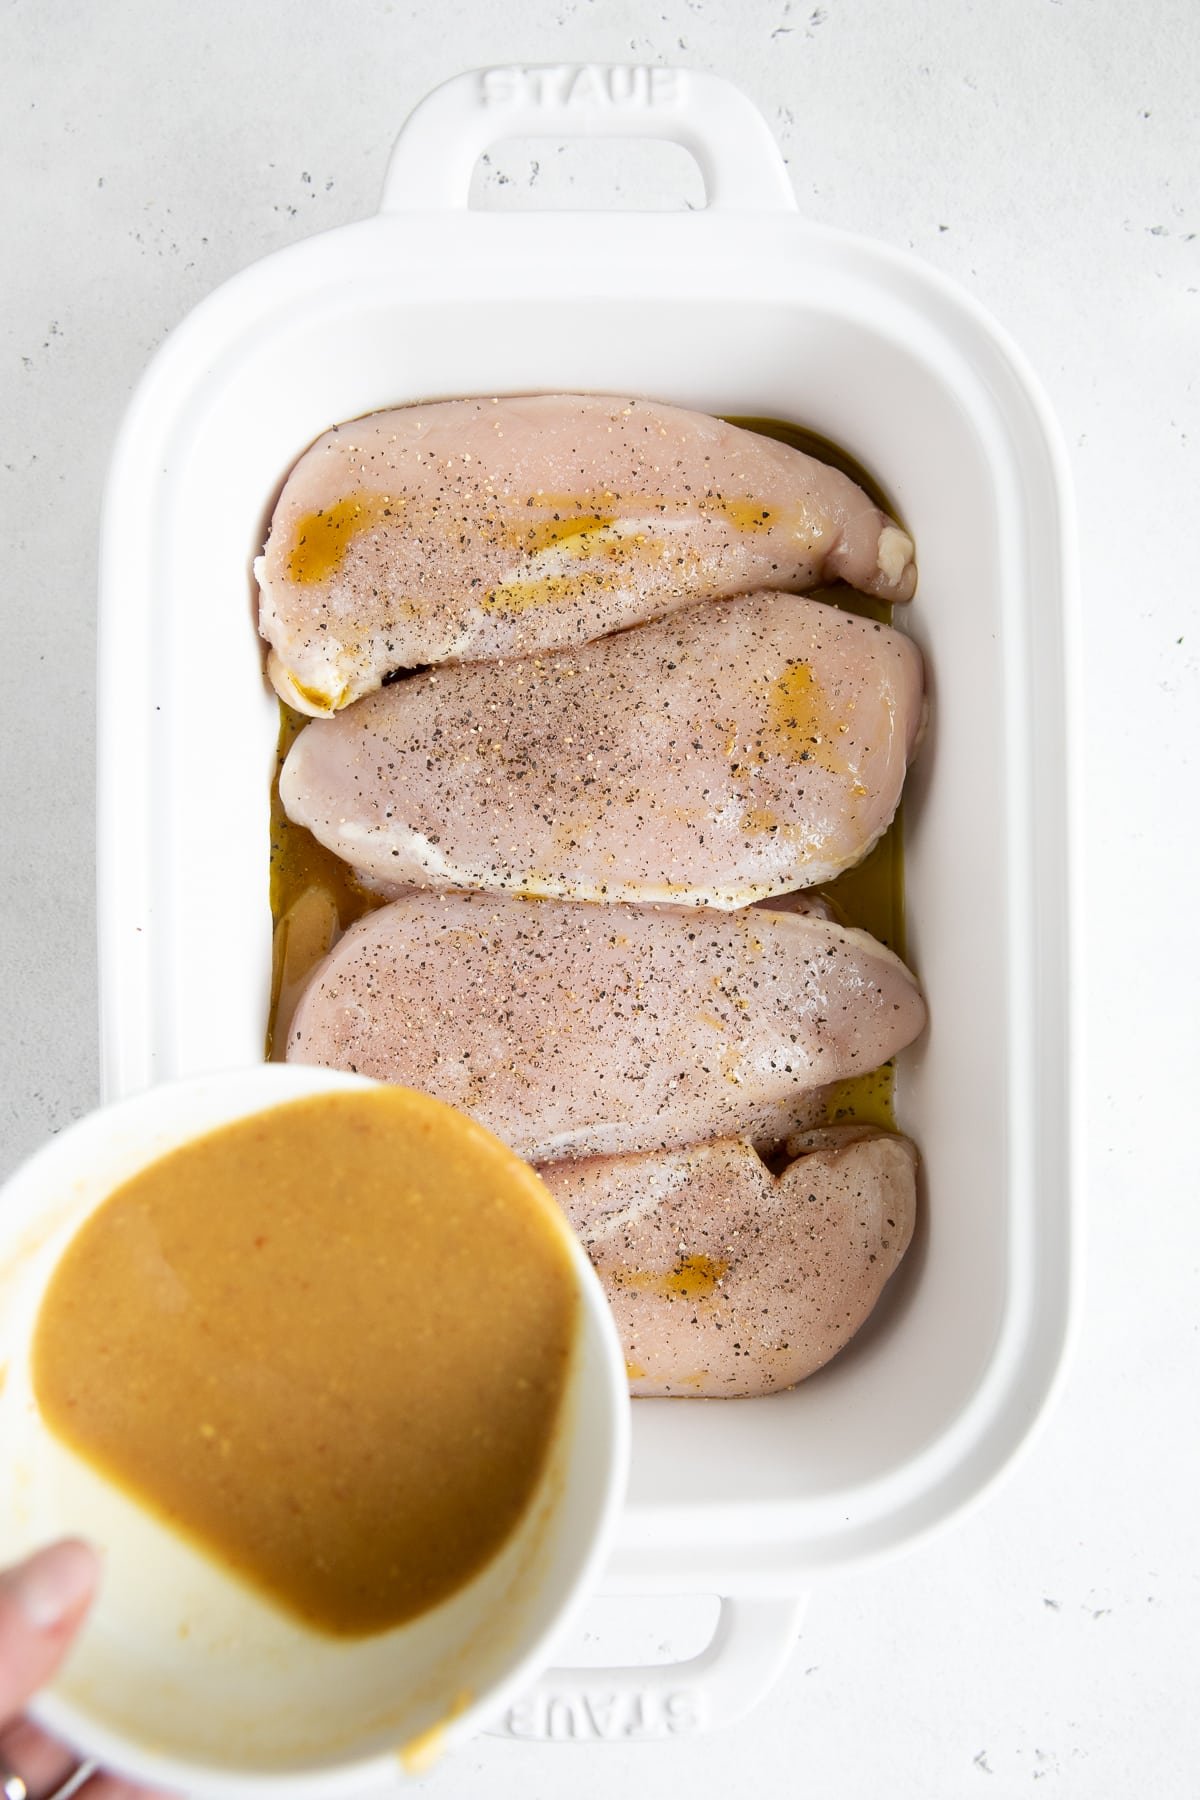 Four raw chicken breasts seasoned with salt and pepper in a white baking dish.